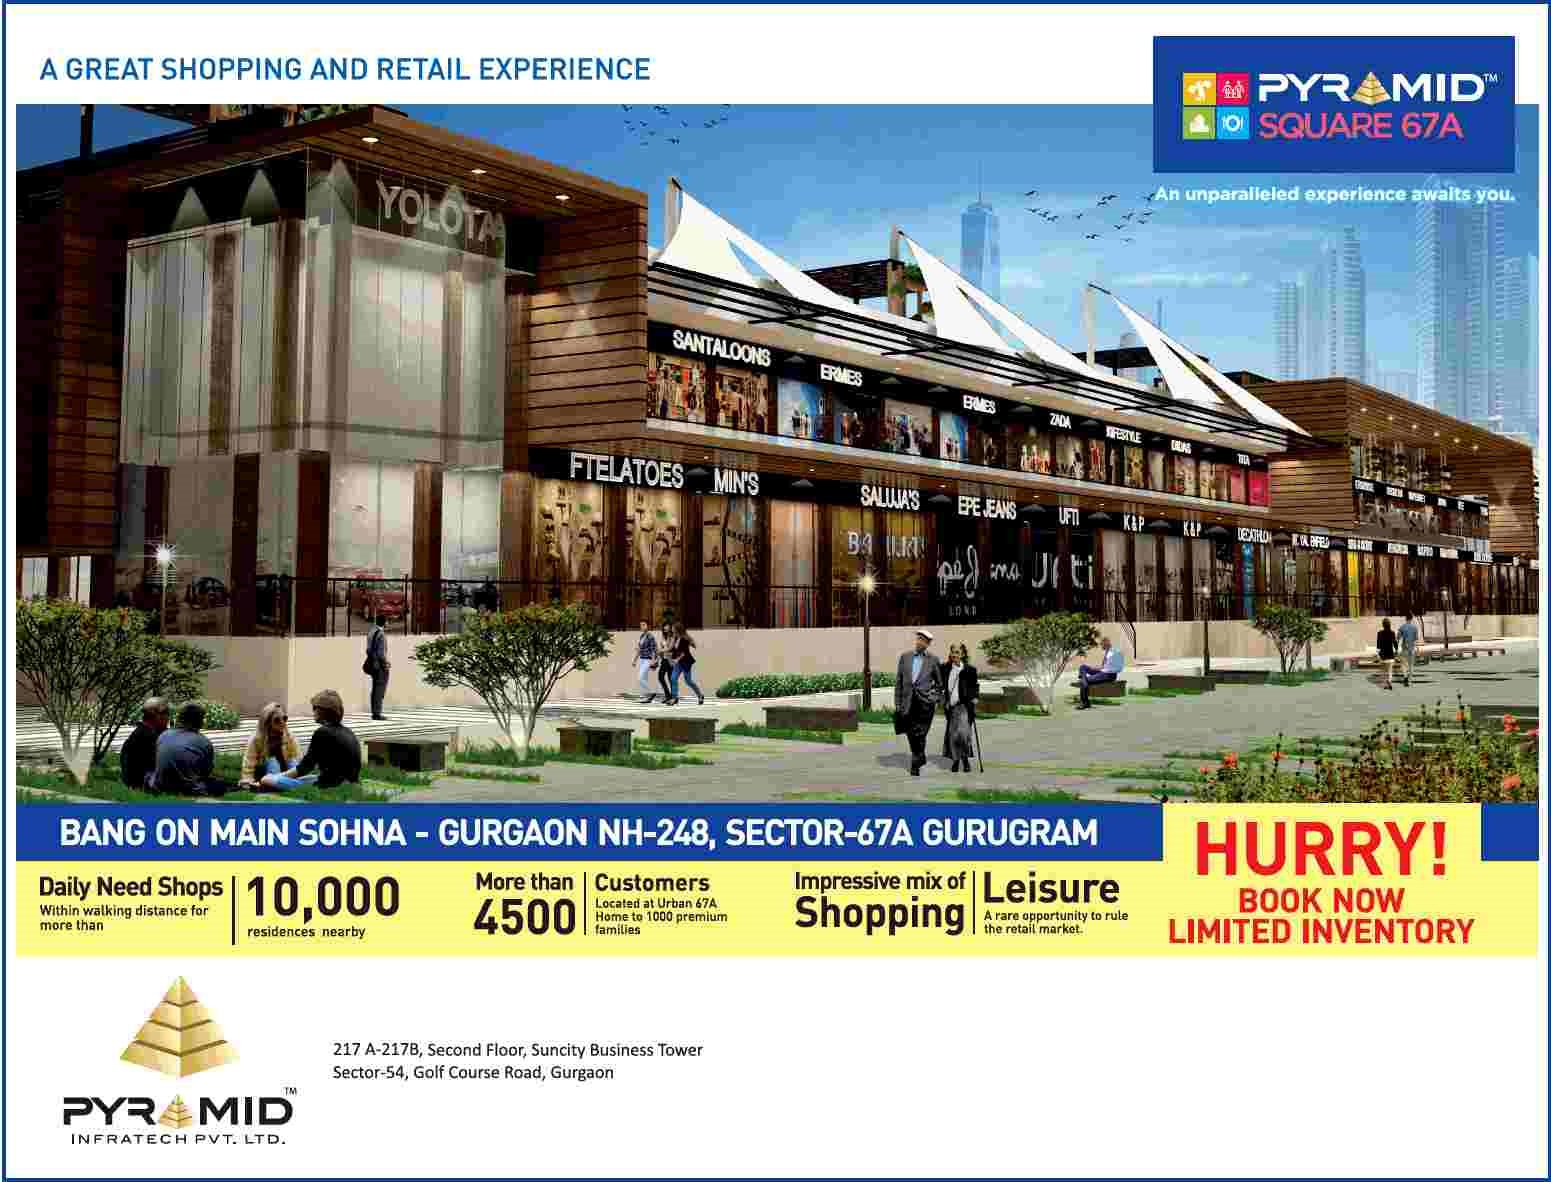 Presenting great shopping & retail experience at Pyramid Square 67A in Gurgaon Update